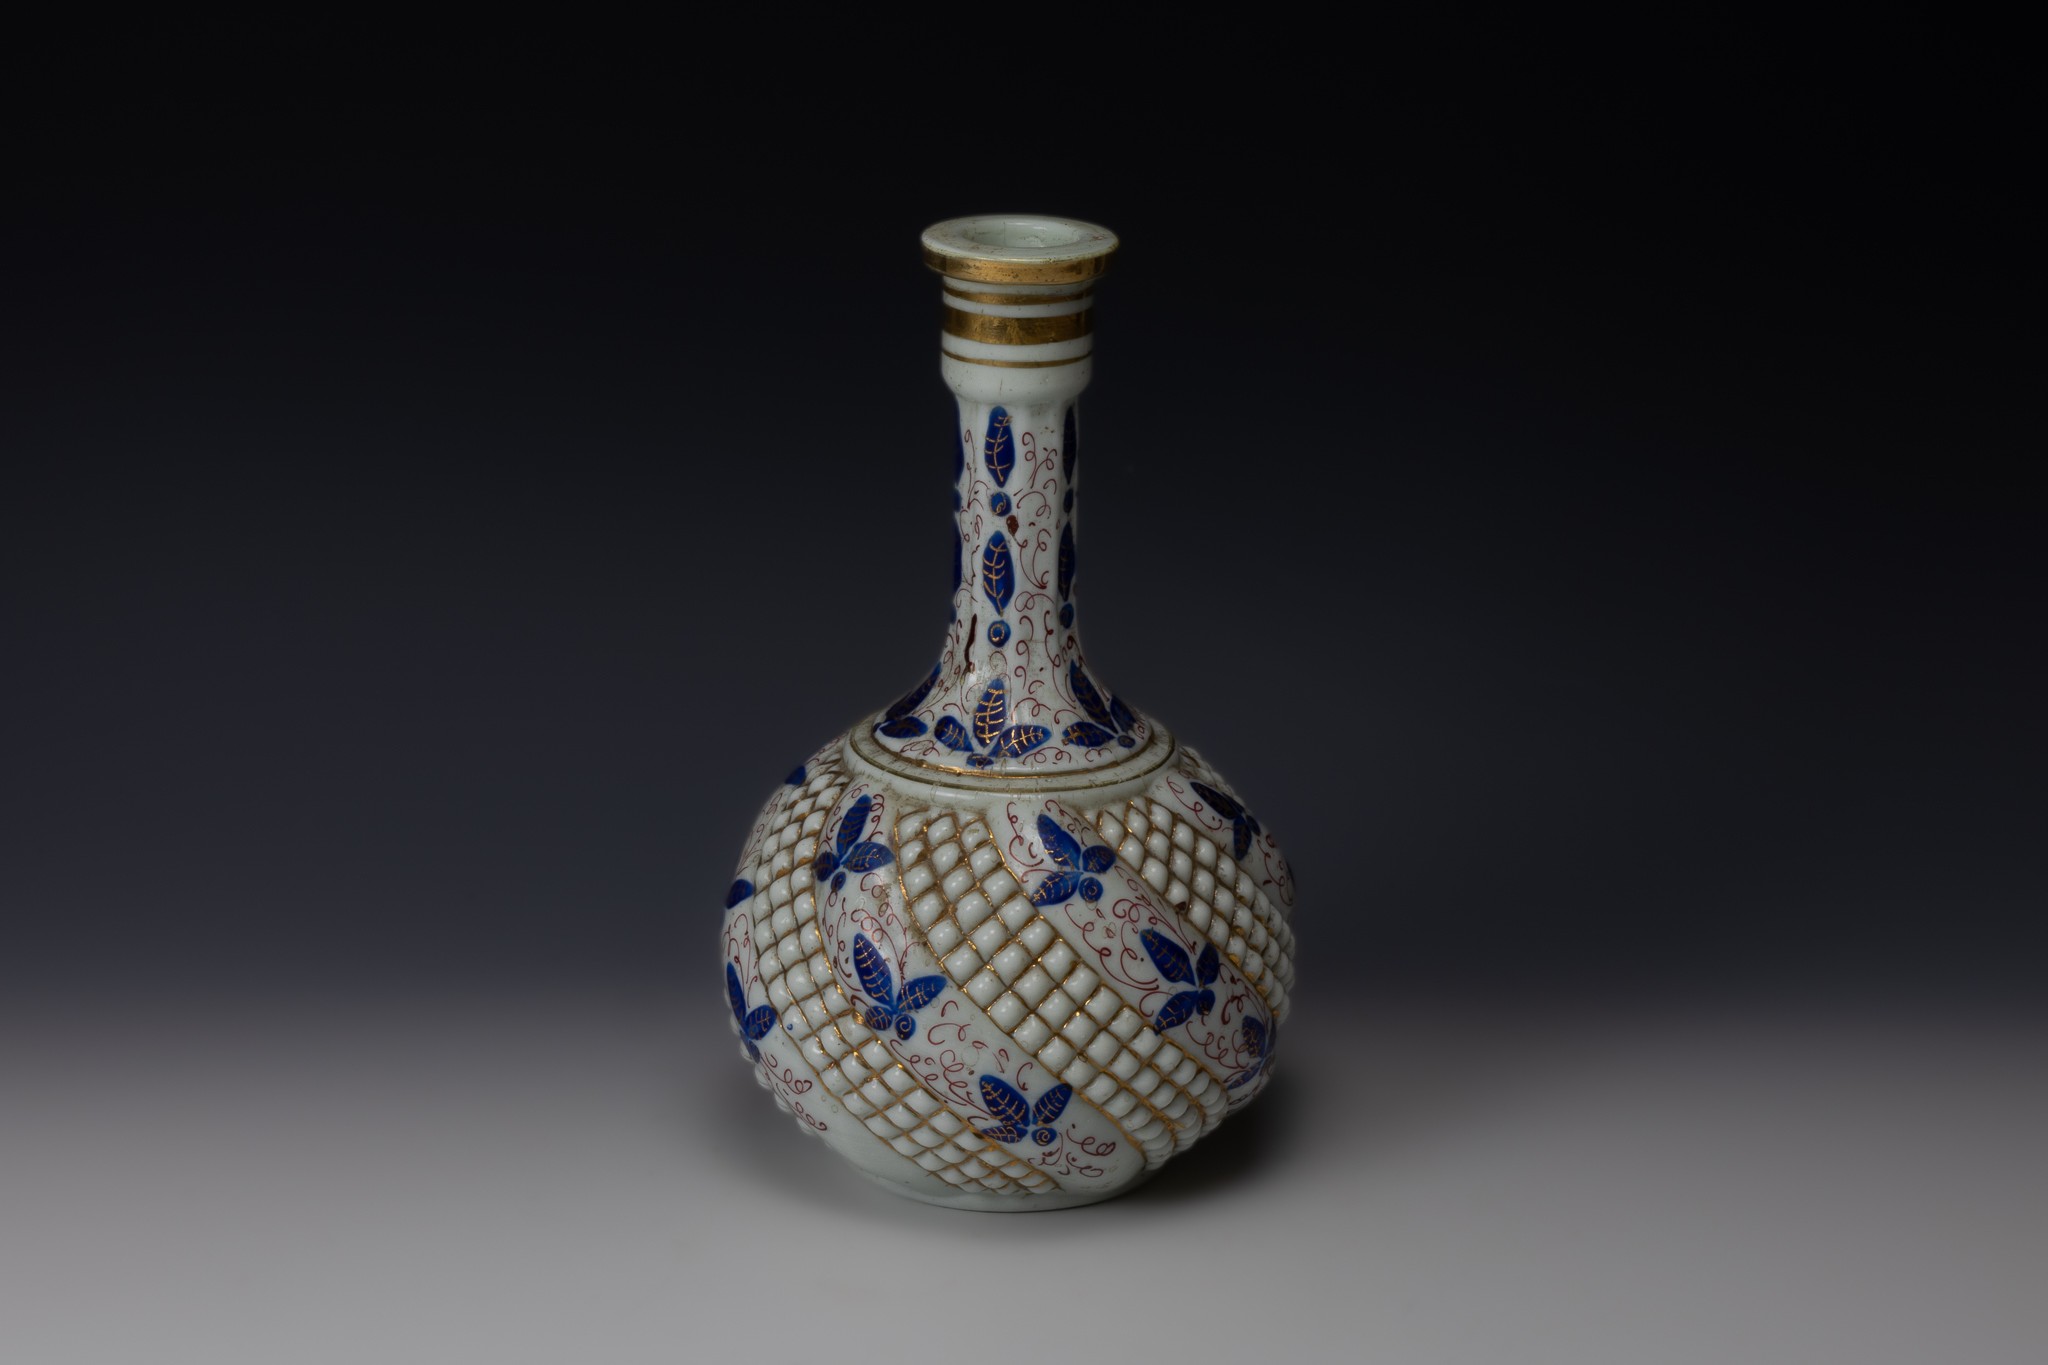 An Islamic Qajar Vase from the 19th Century Depicting Blue Butterflies and Floral Patterns.

H: Appr